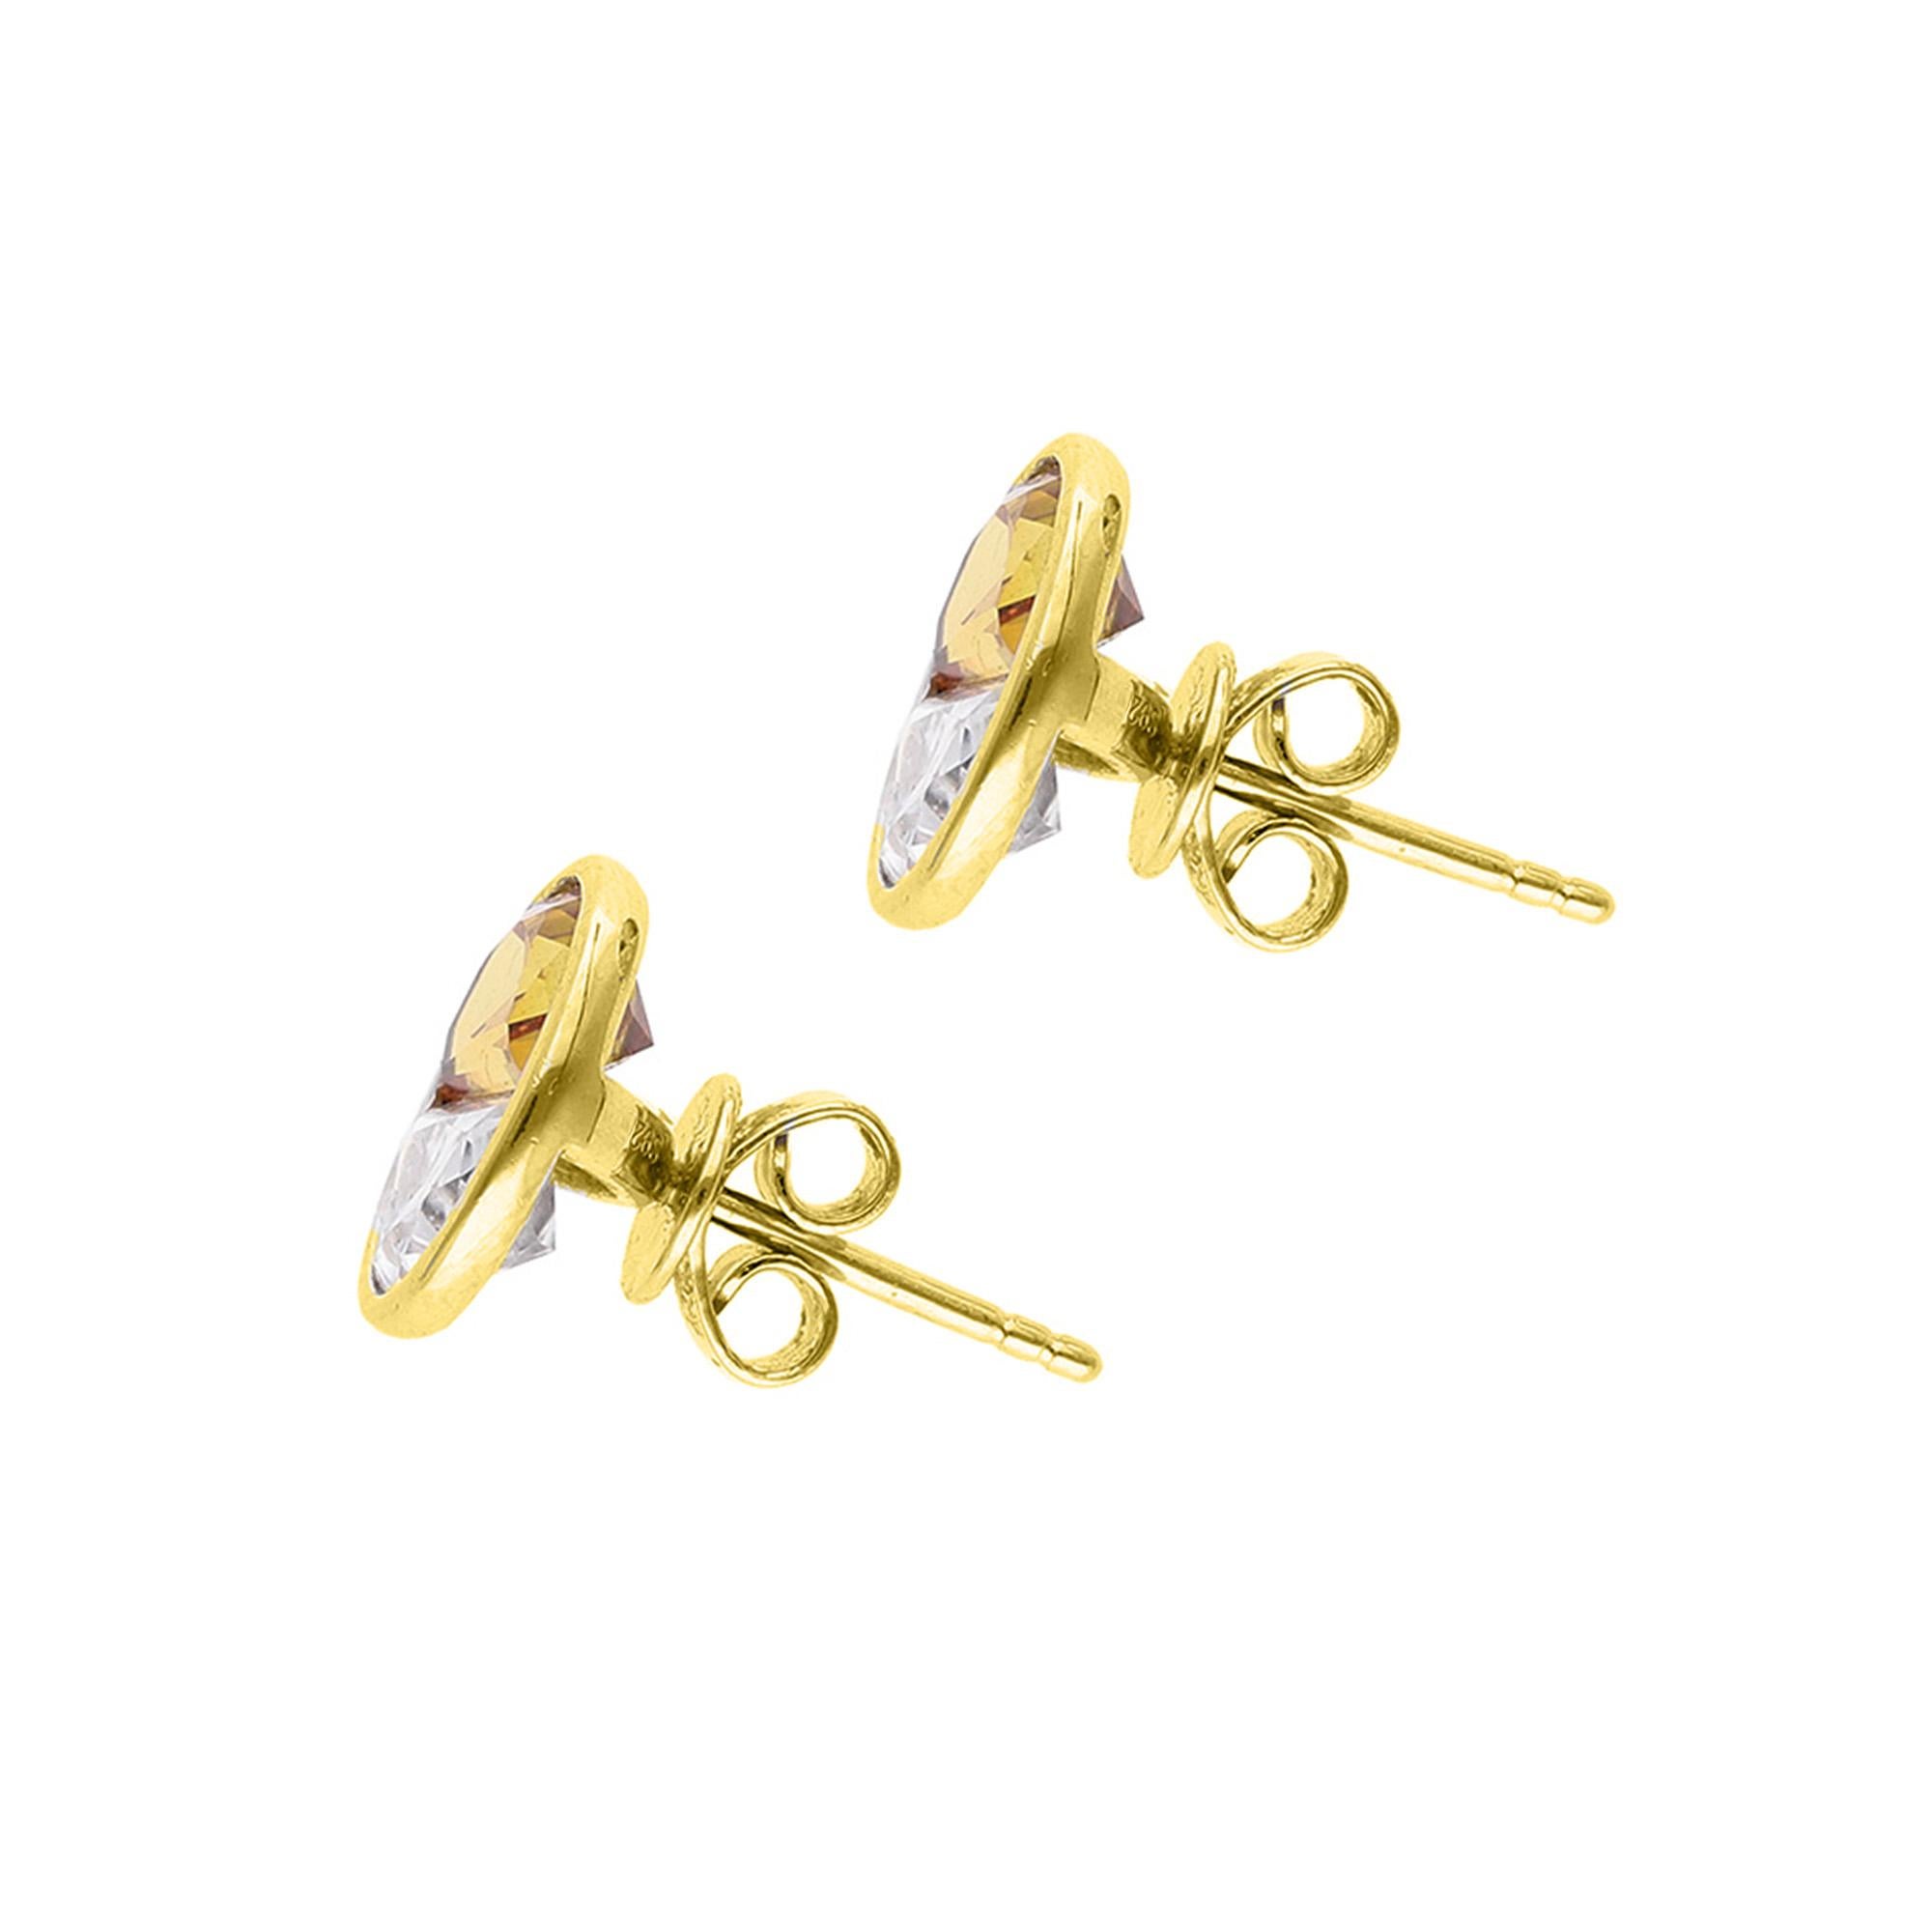 These studs feature two rare, half moon cut yellow sapphires and moissanite in a tension setting. The contrasting colours allude to the yin yang, the ancient symbol of harmony and balance. This pair of studs shine brightly.  

Details:

Available in